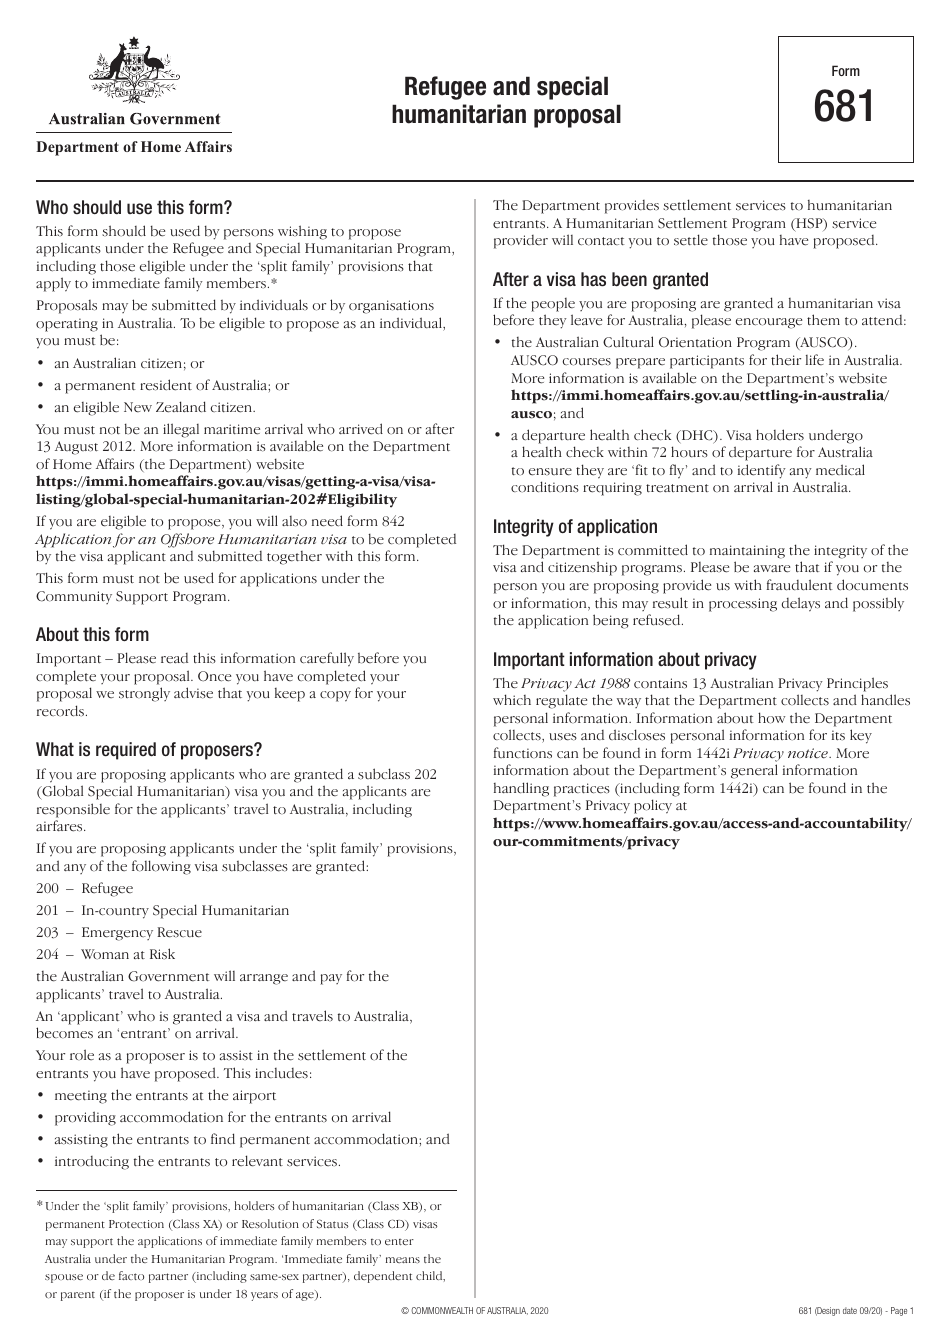 Form 681 Refugee and Special Humanitarian Proposal - Australia, Page 1